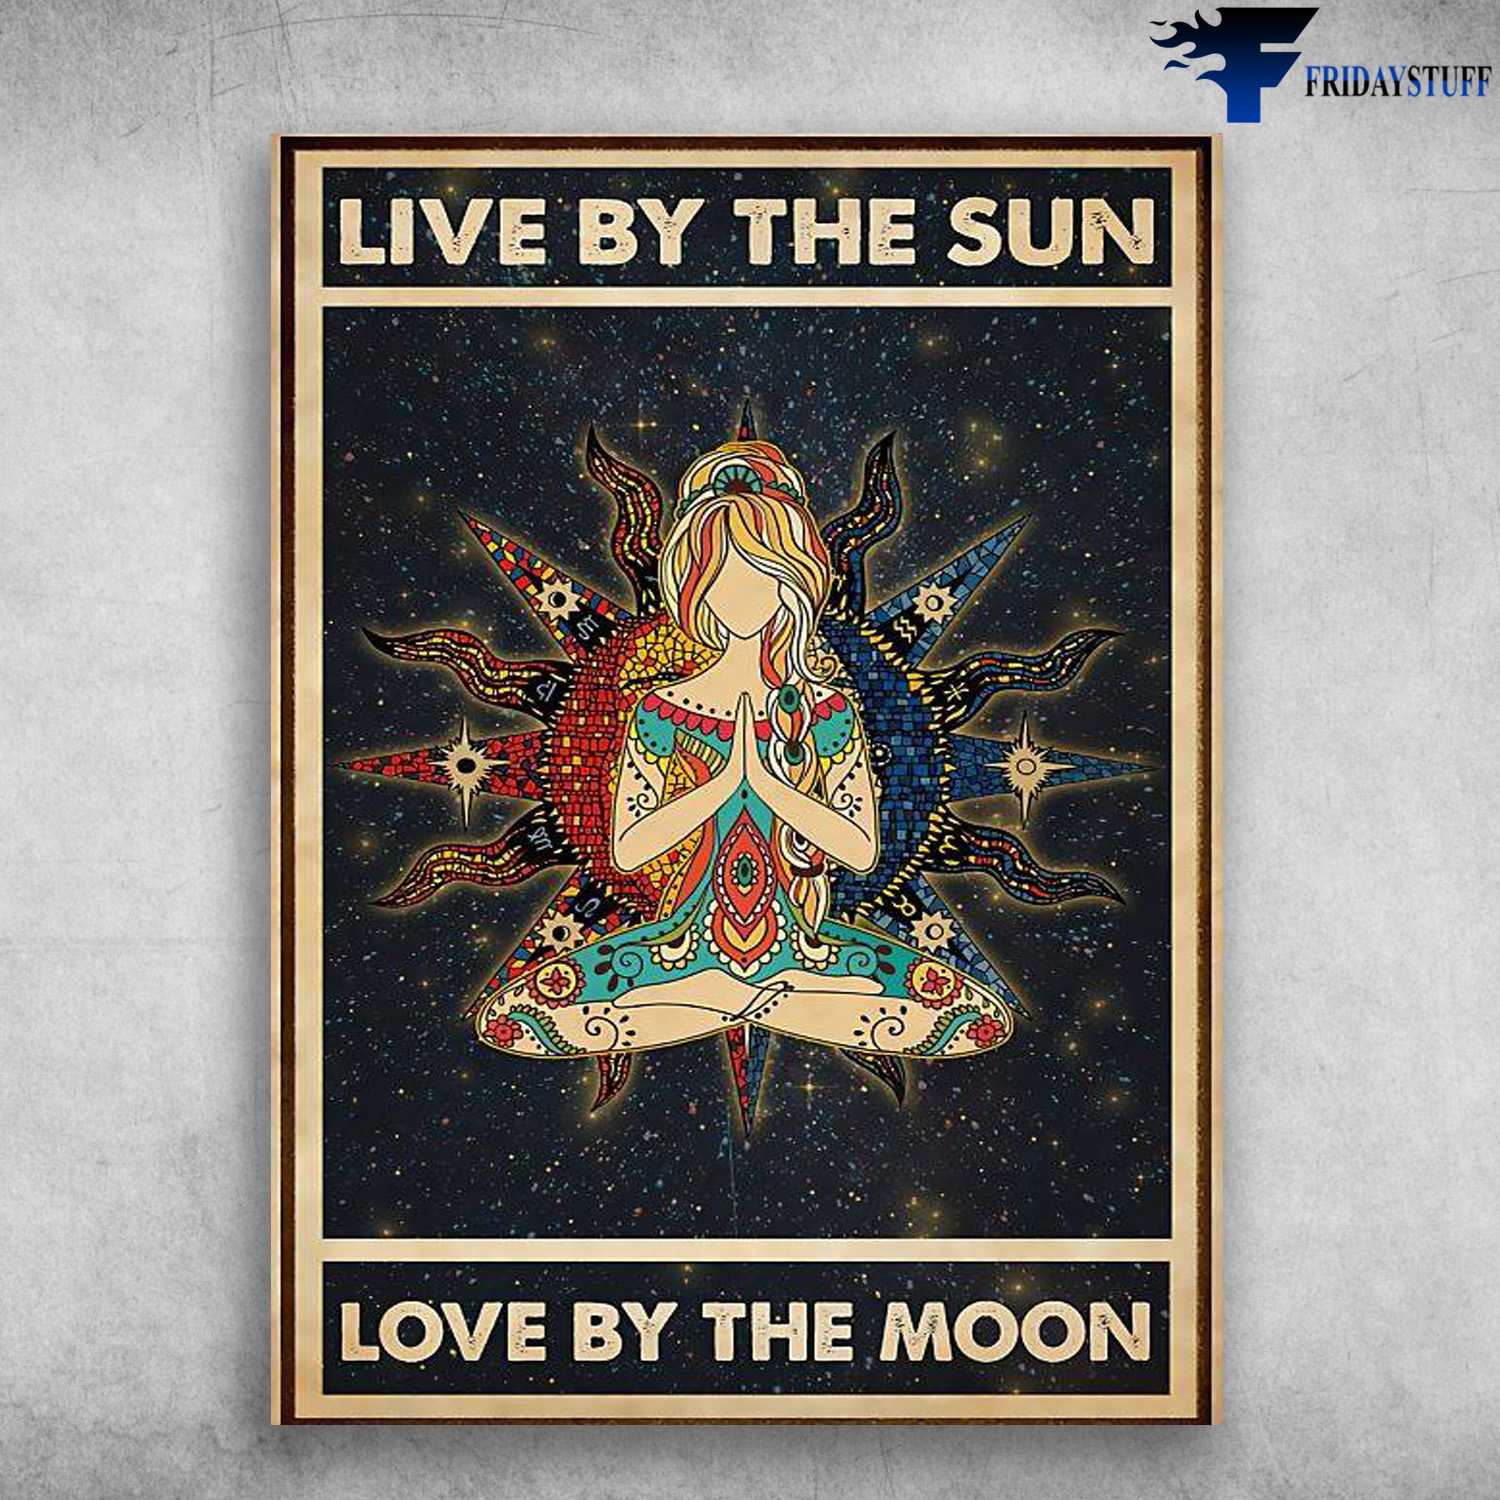 Yoga Poster, Yoga Lover, Live The Sun, Love By The Moon